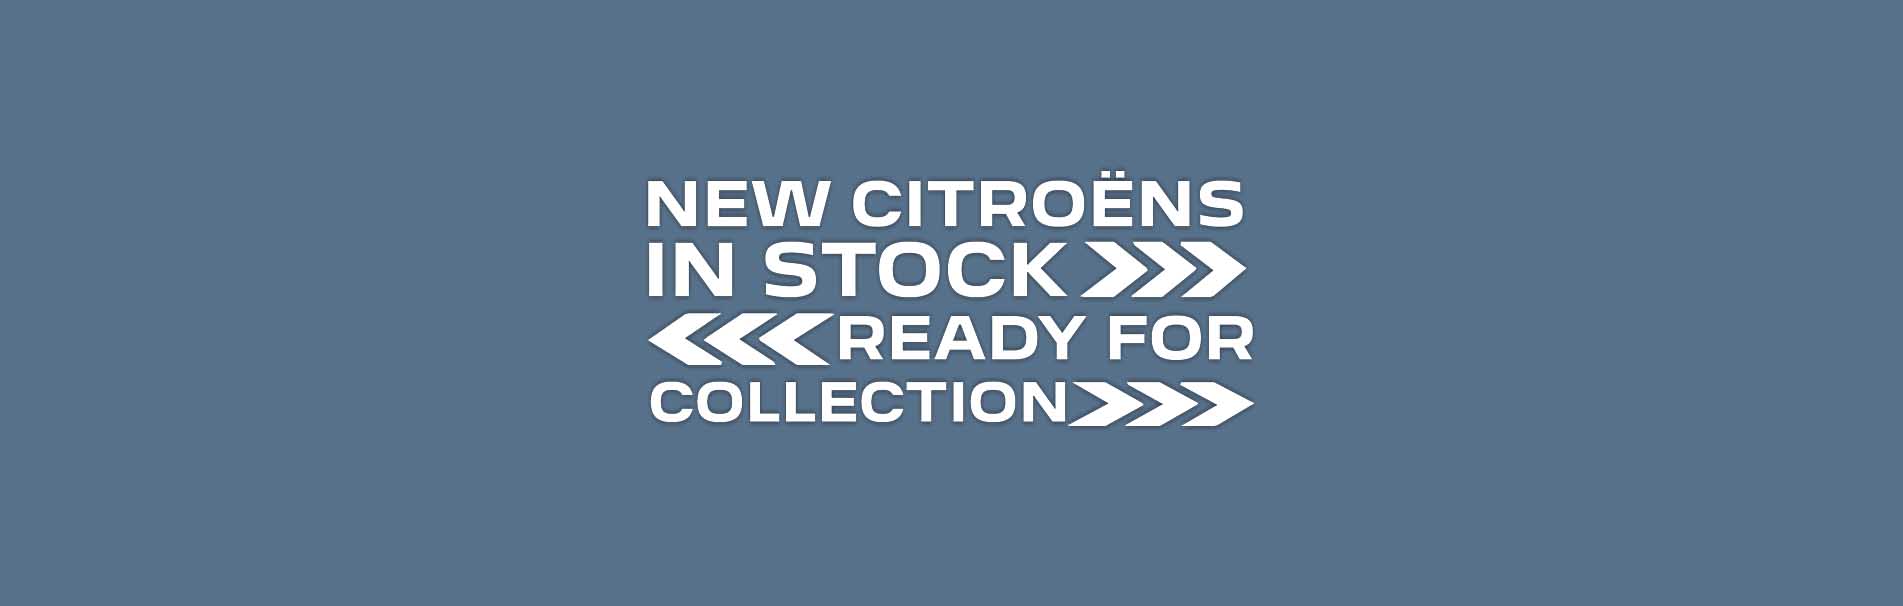 citroen-petrols-diesels--hybrid-electrics-in-stock-and-ready-for-collection